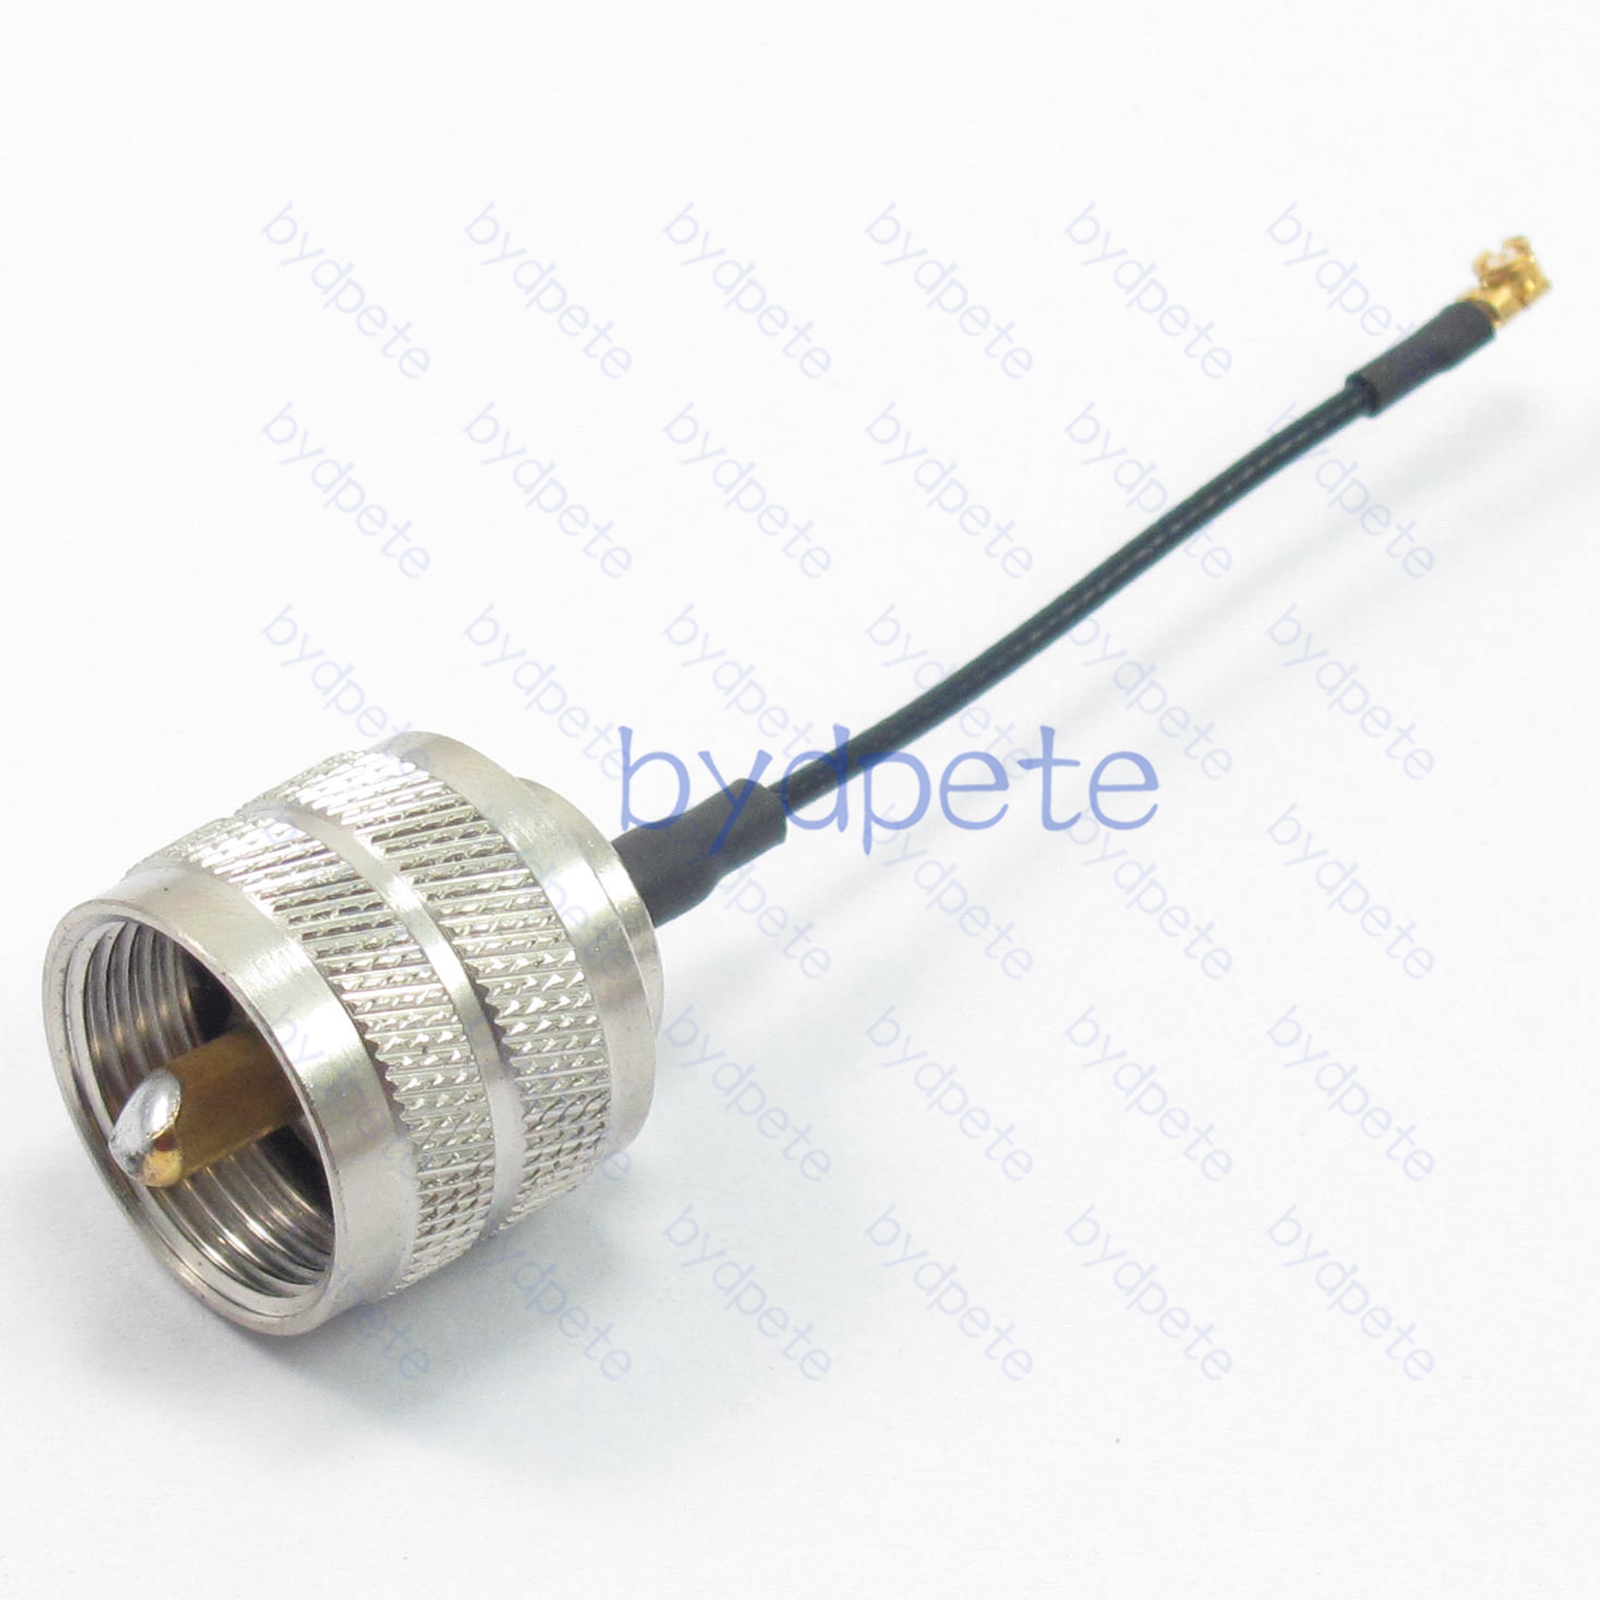 IPX IPEX UFL U.FL Plug to UHF Male 1.37mm Pigtail cable Coaxial Koaxial Kable RF 50ohms bydpete